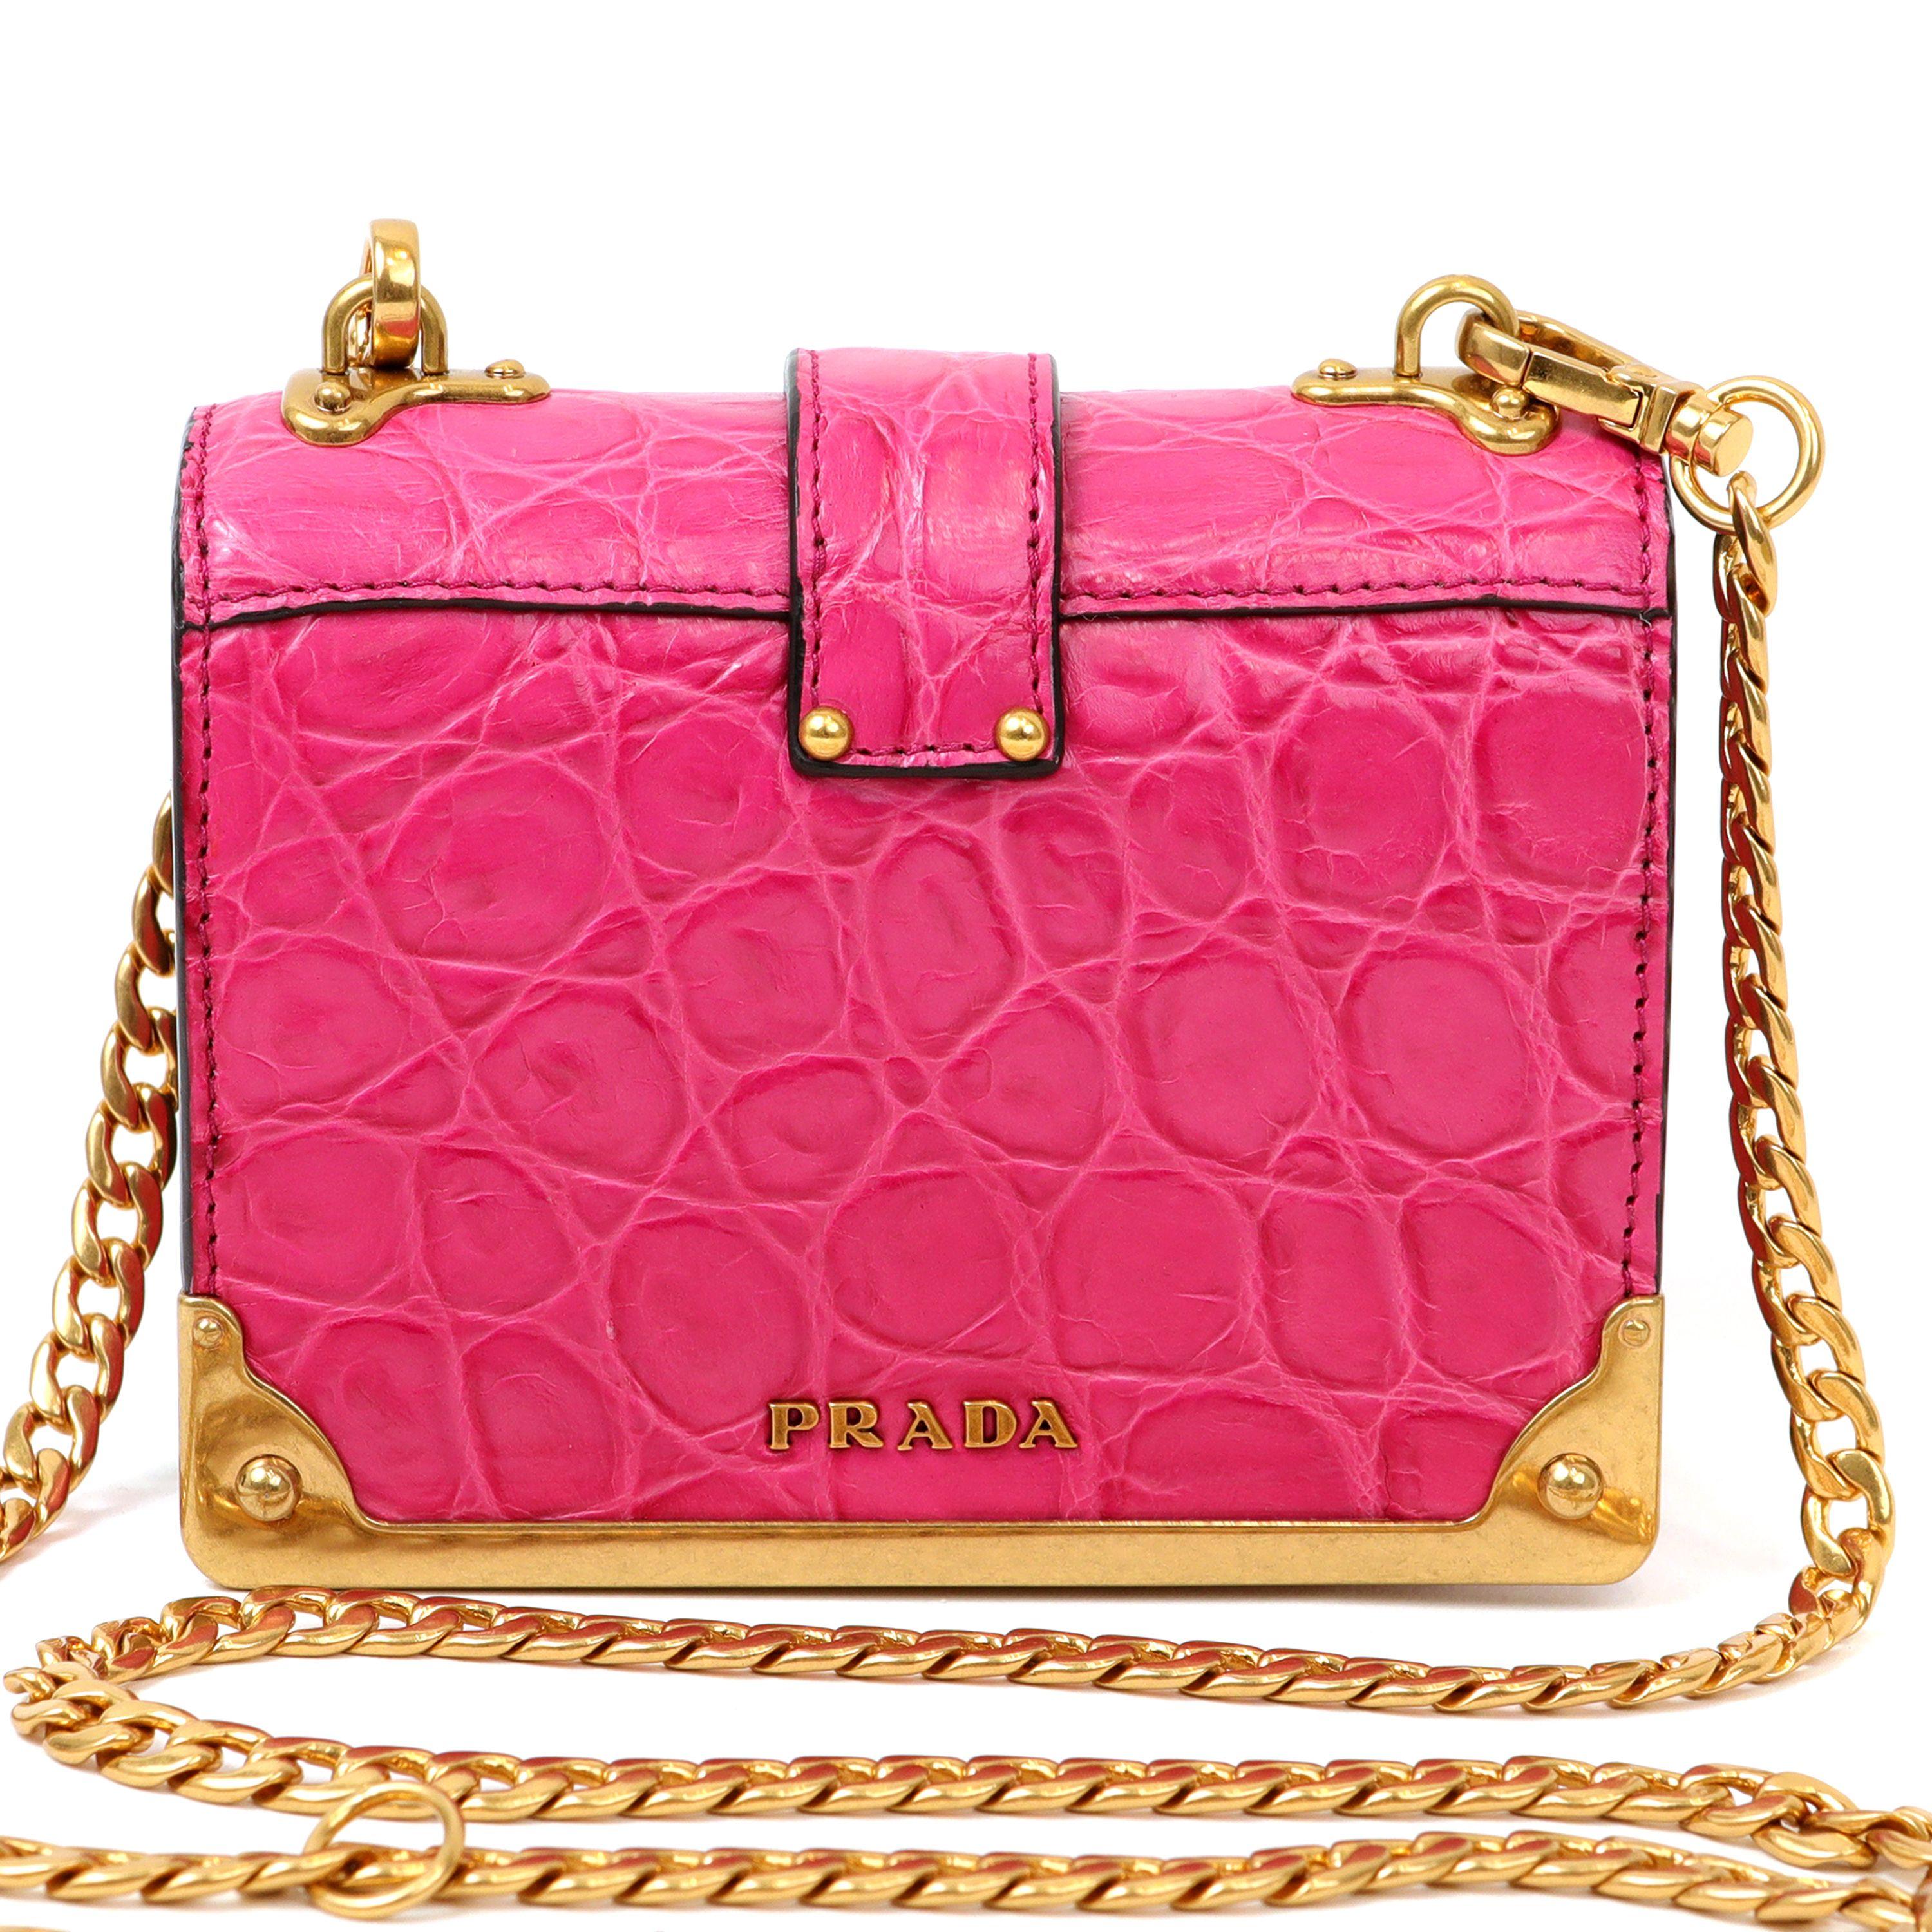 This authentic Prada Pink Crocodile Micro Cahier Bag is in pristine condition.  Bright pink crocodile with gold hardware.  Long gold tone chain strap. Dust bag included.

PBF 13769
